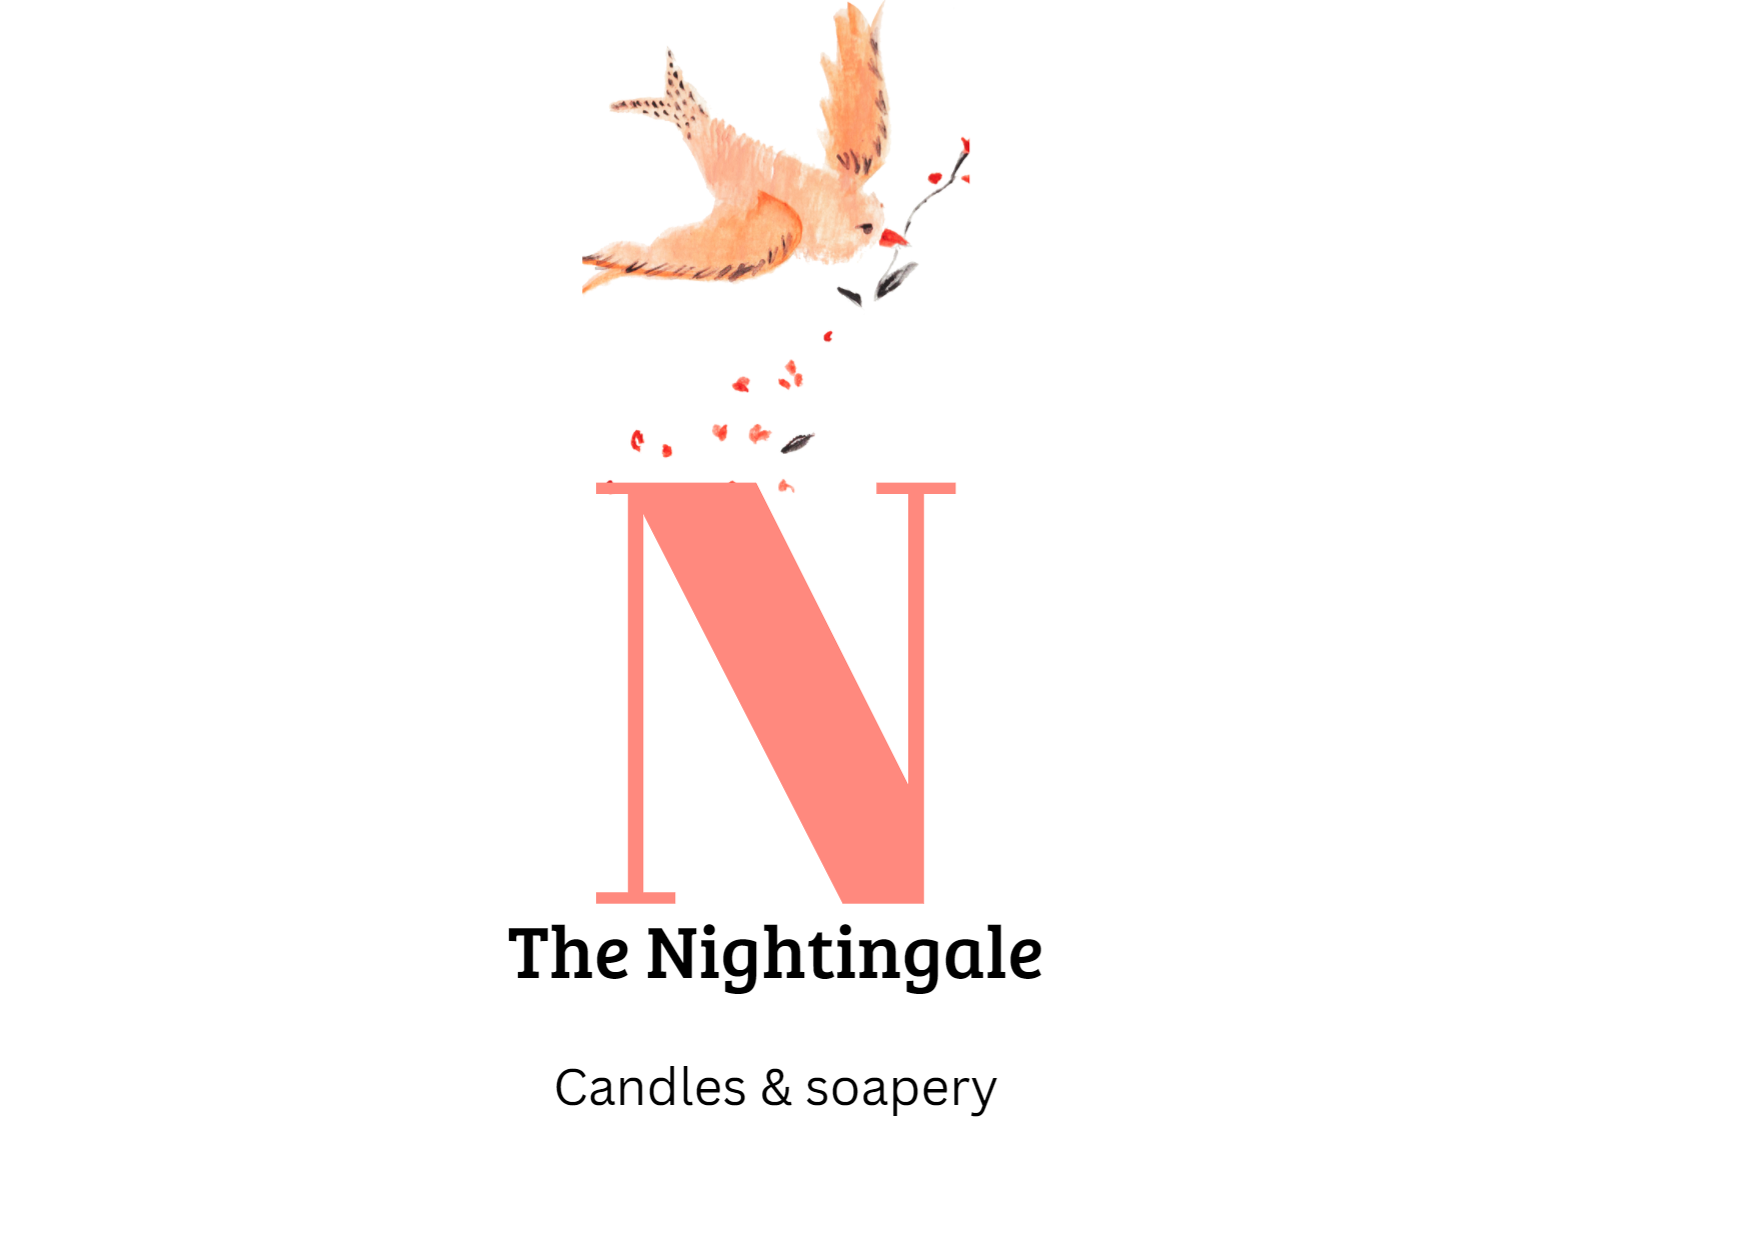 The Nightingale candles & soapery